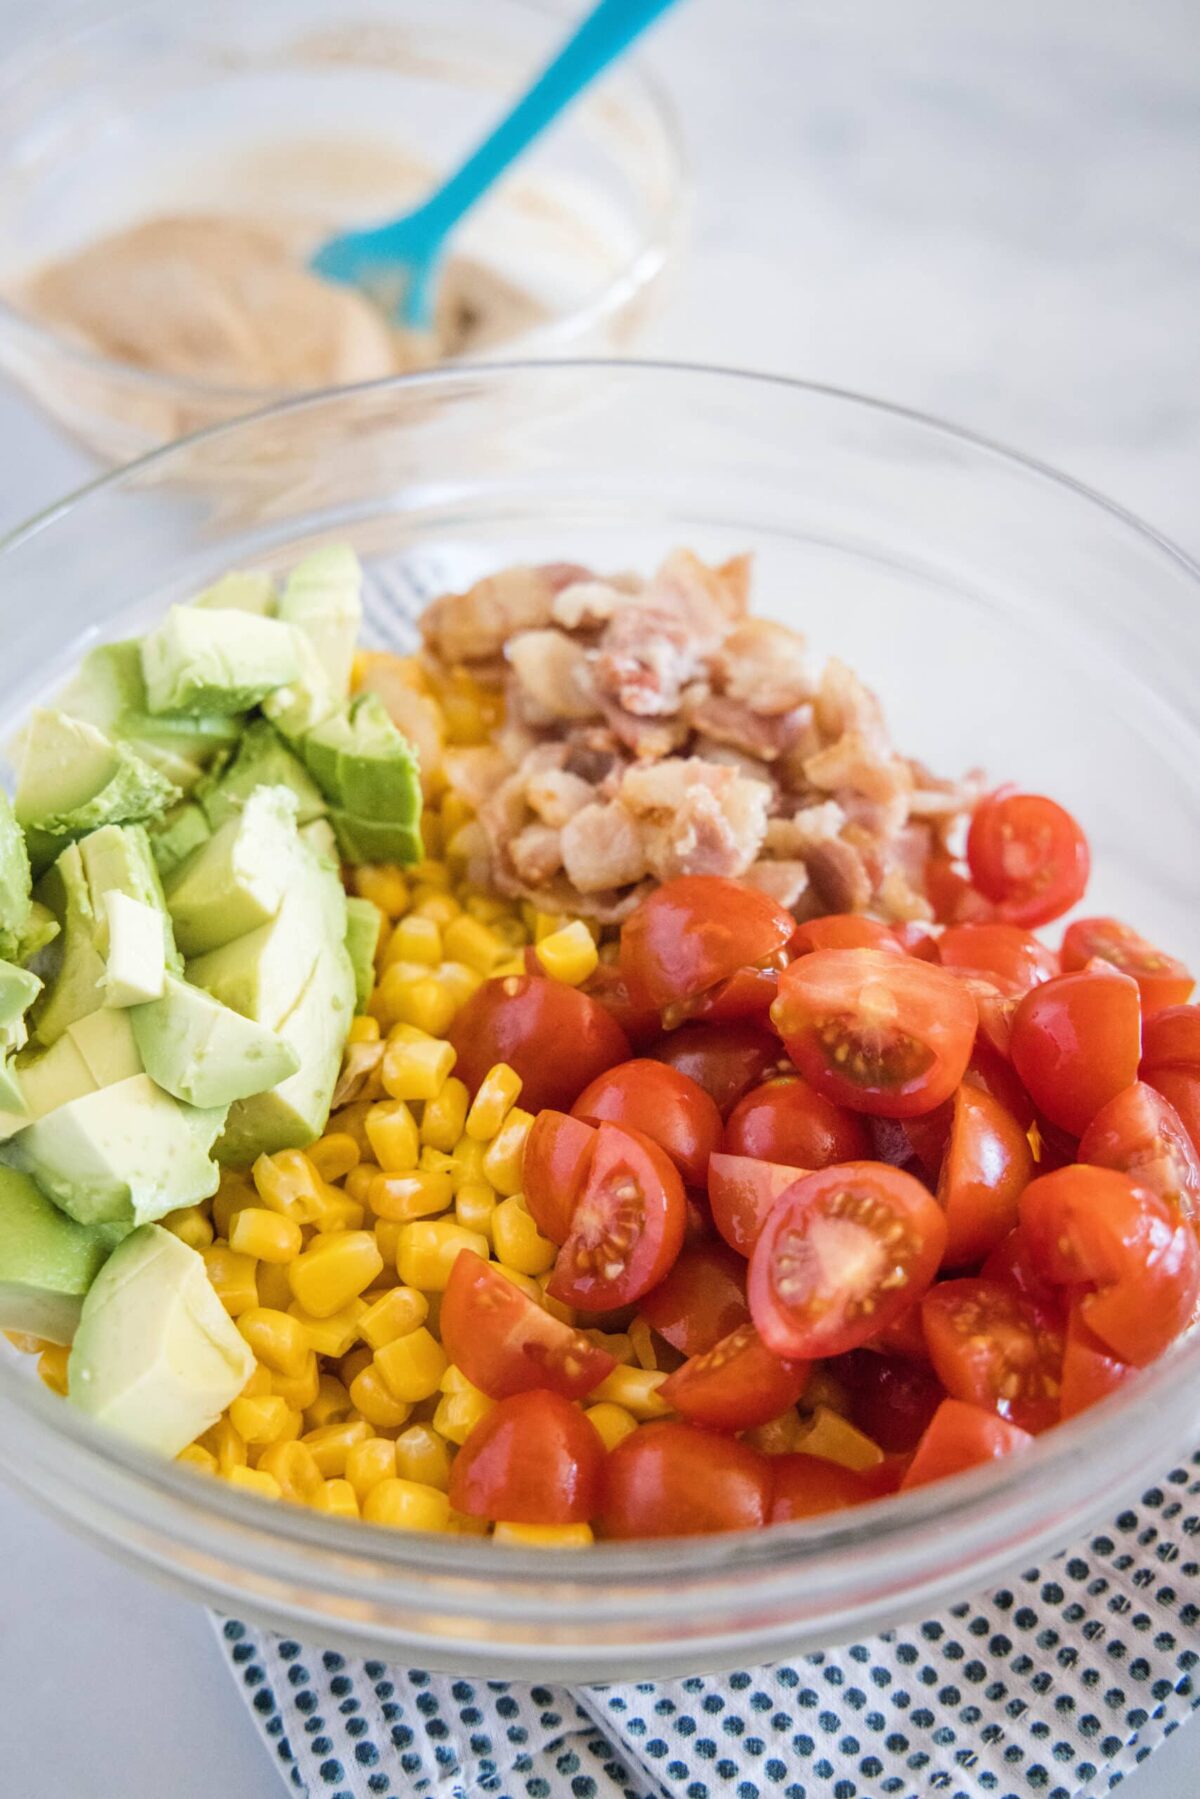 A mixing bowl with quartered cherry tomatoes, corn, pieces of bacon, and avocado